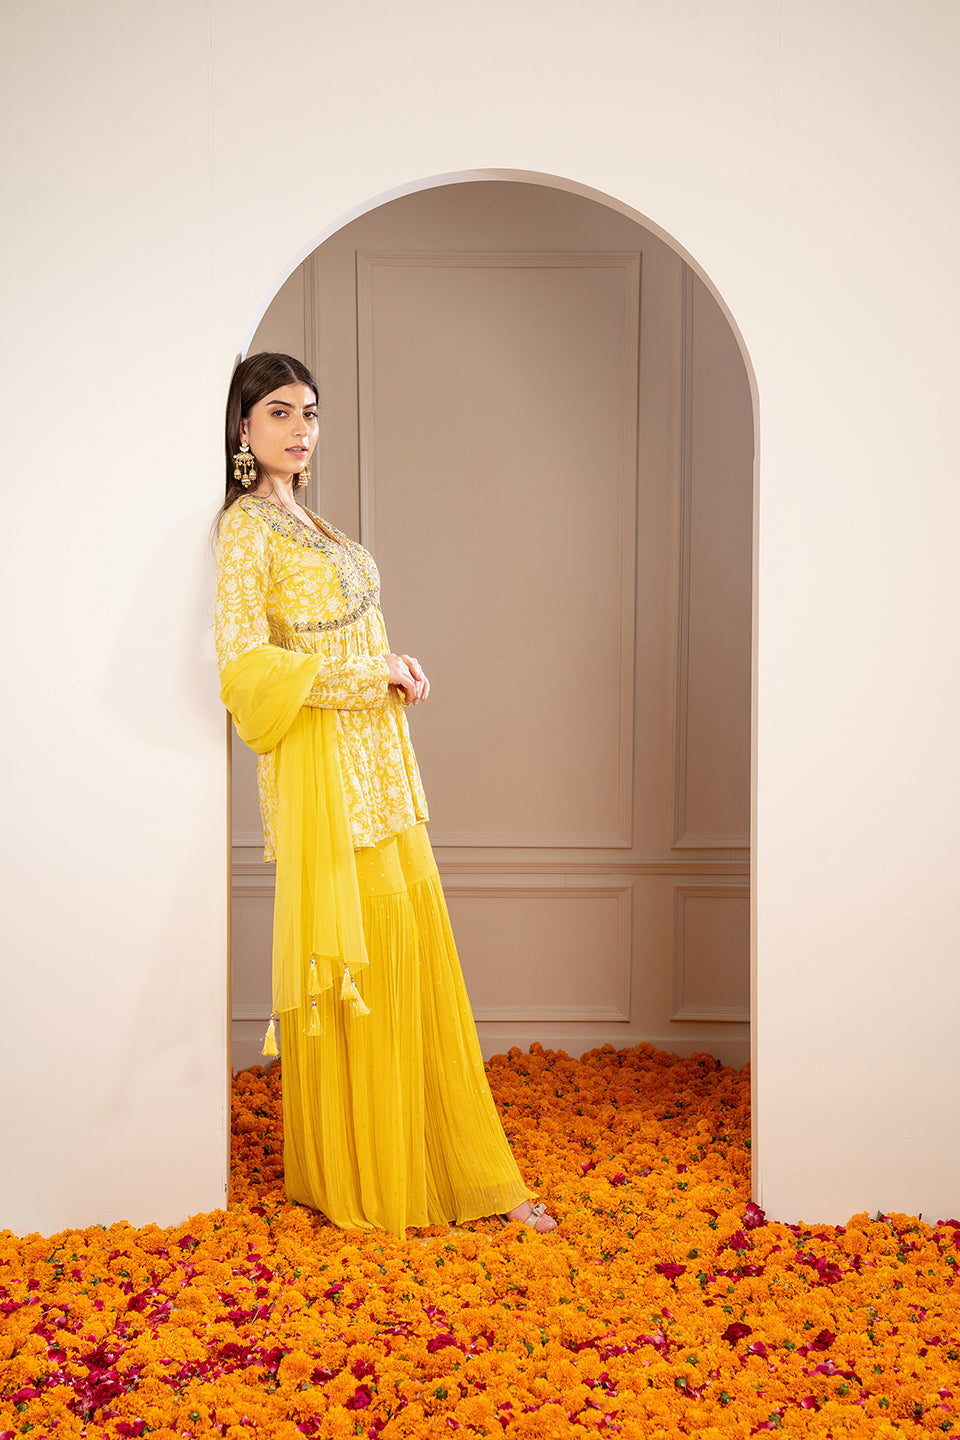 Spectacular Yellow Haldi Outfits For Your Super Memorable Ceremony | Haldi  outfits, Mehendi outfits, Indian bride outfits